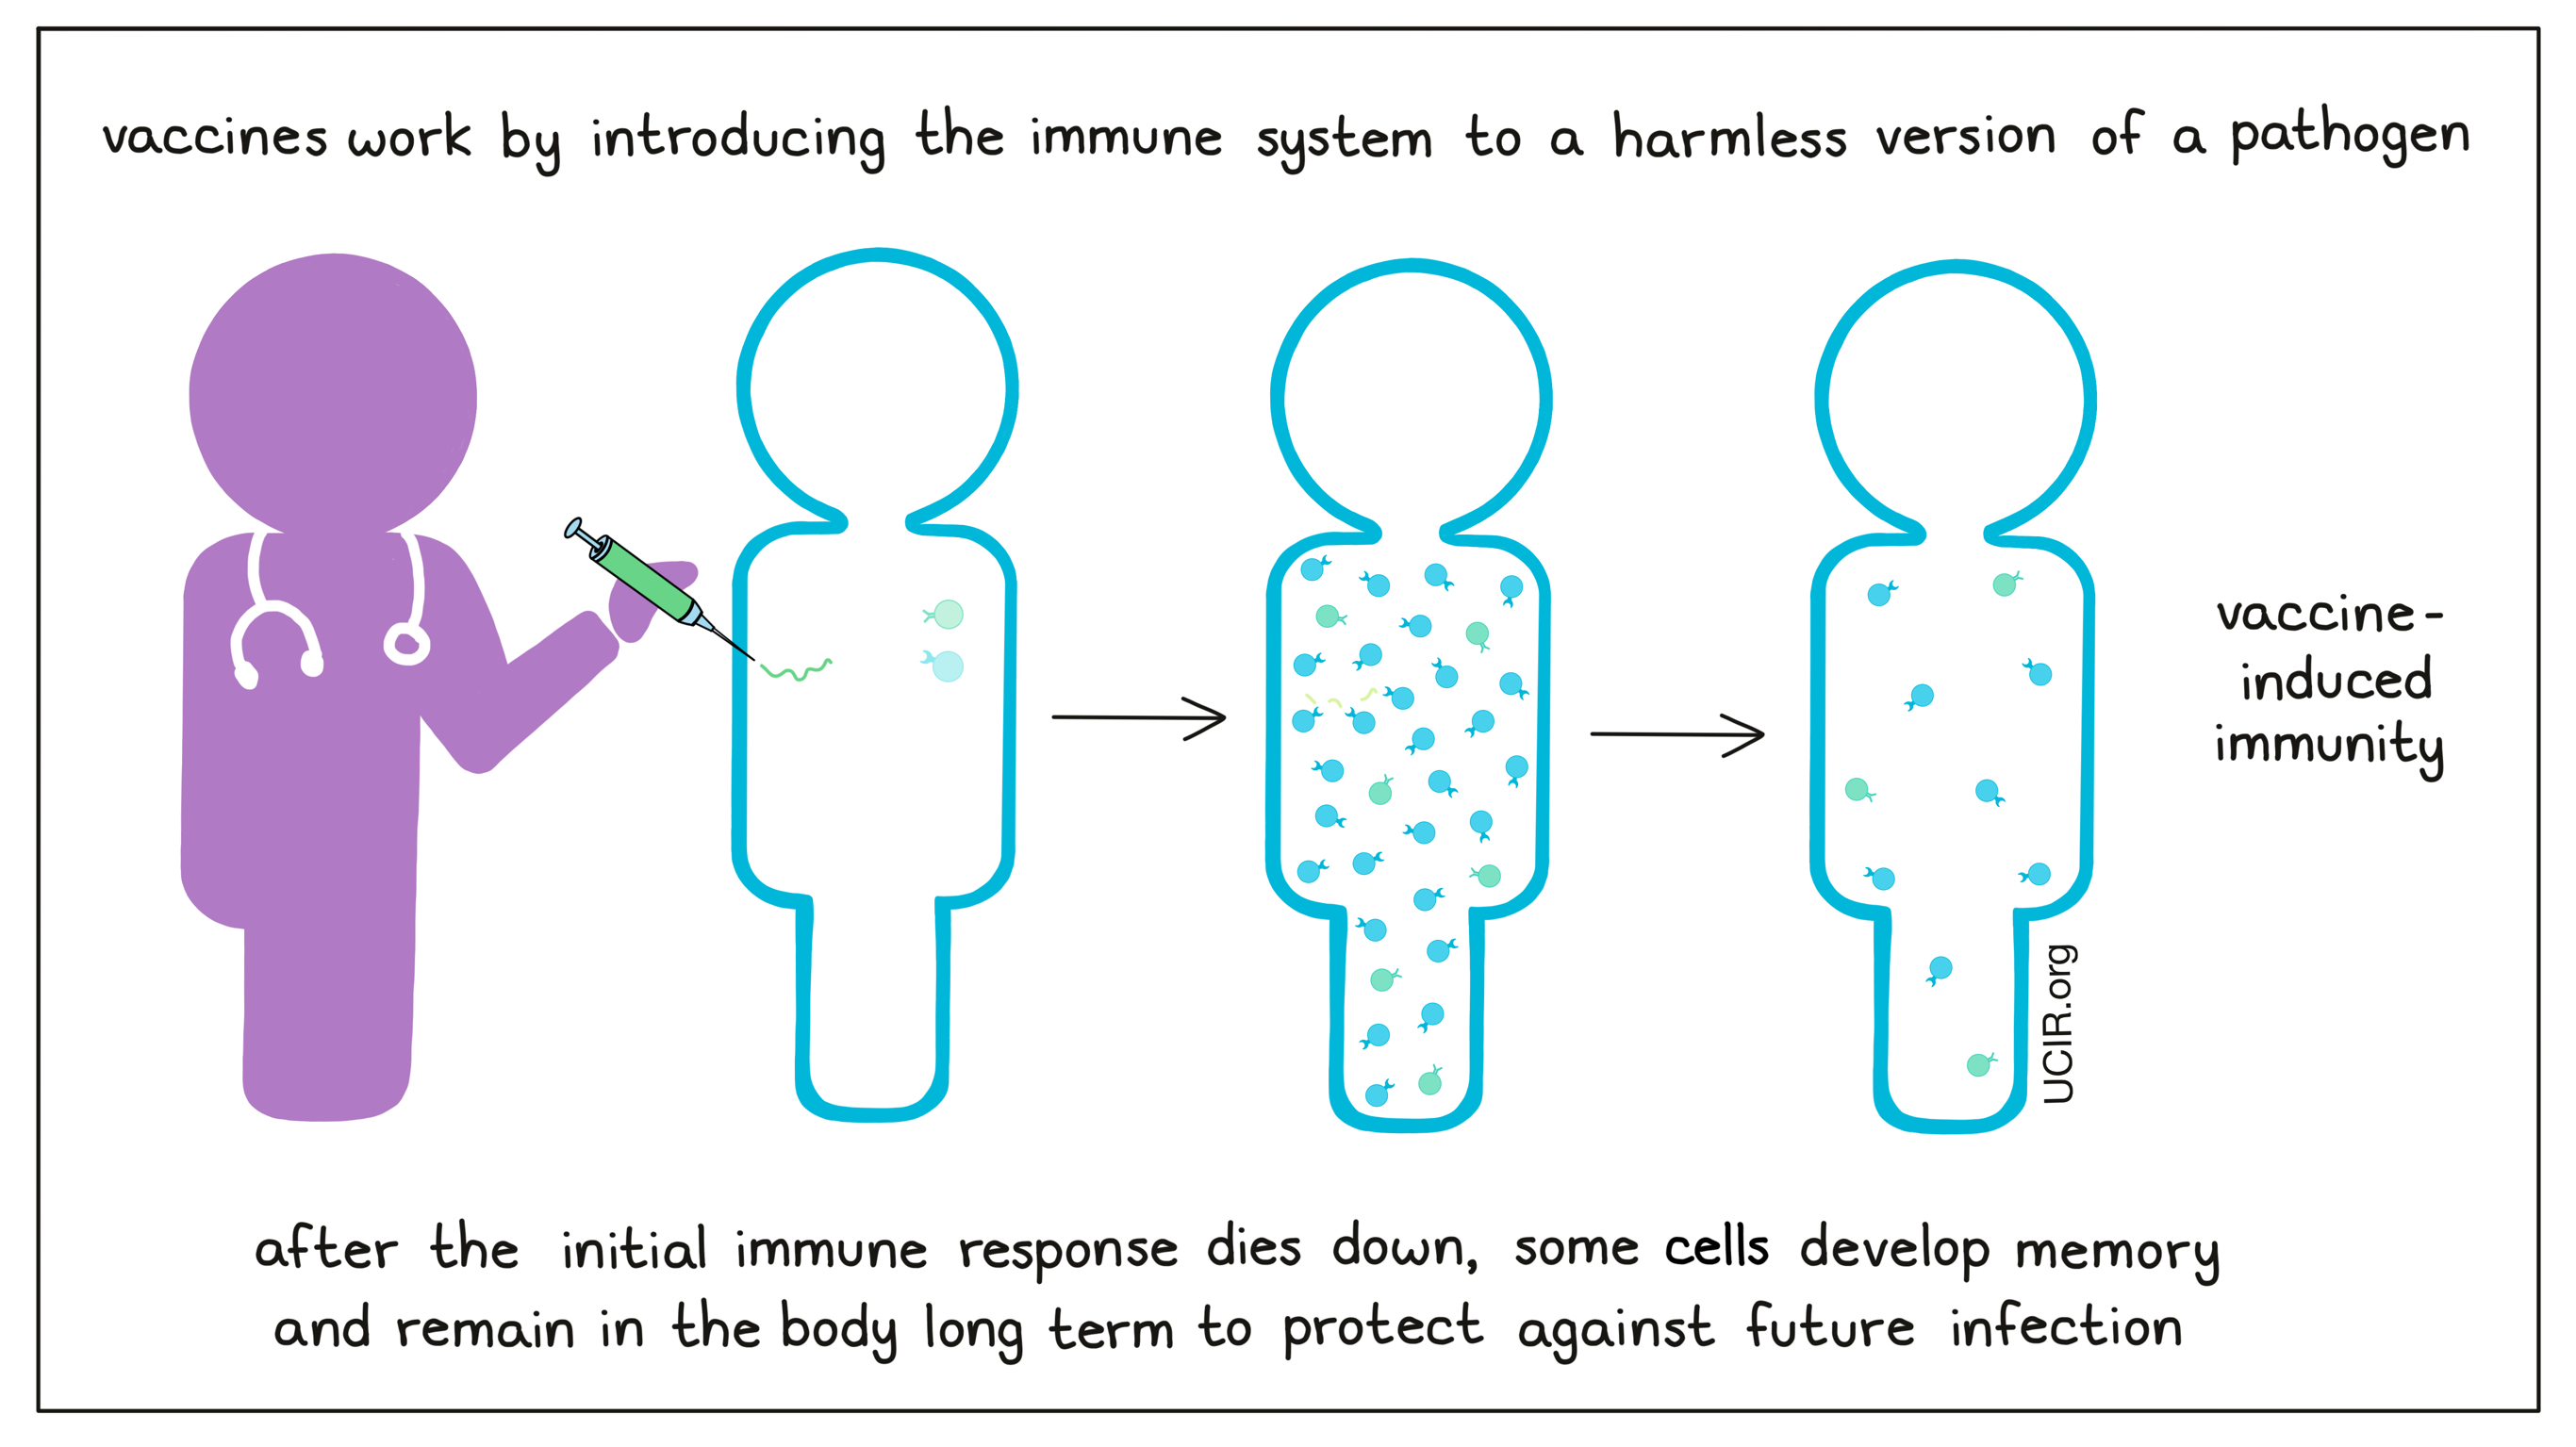 Vaccines work by introducing the immune system to a harmless version of a pathogen